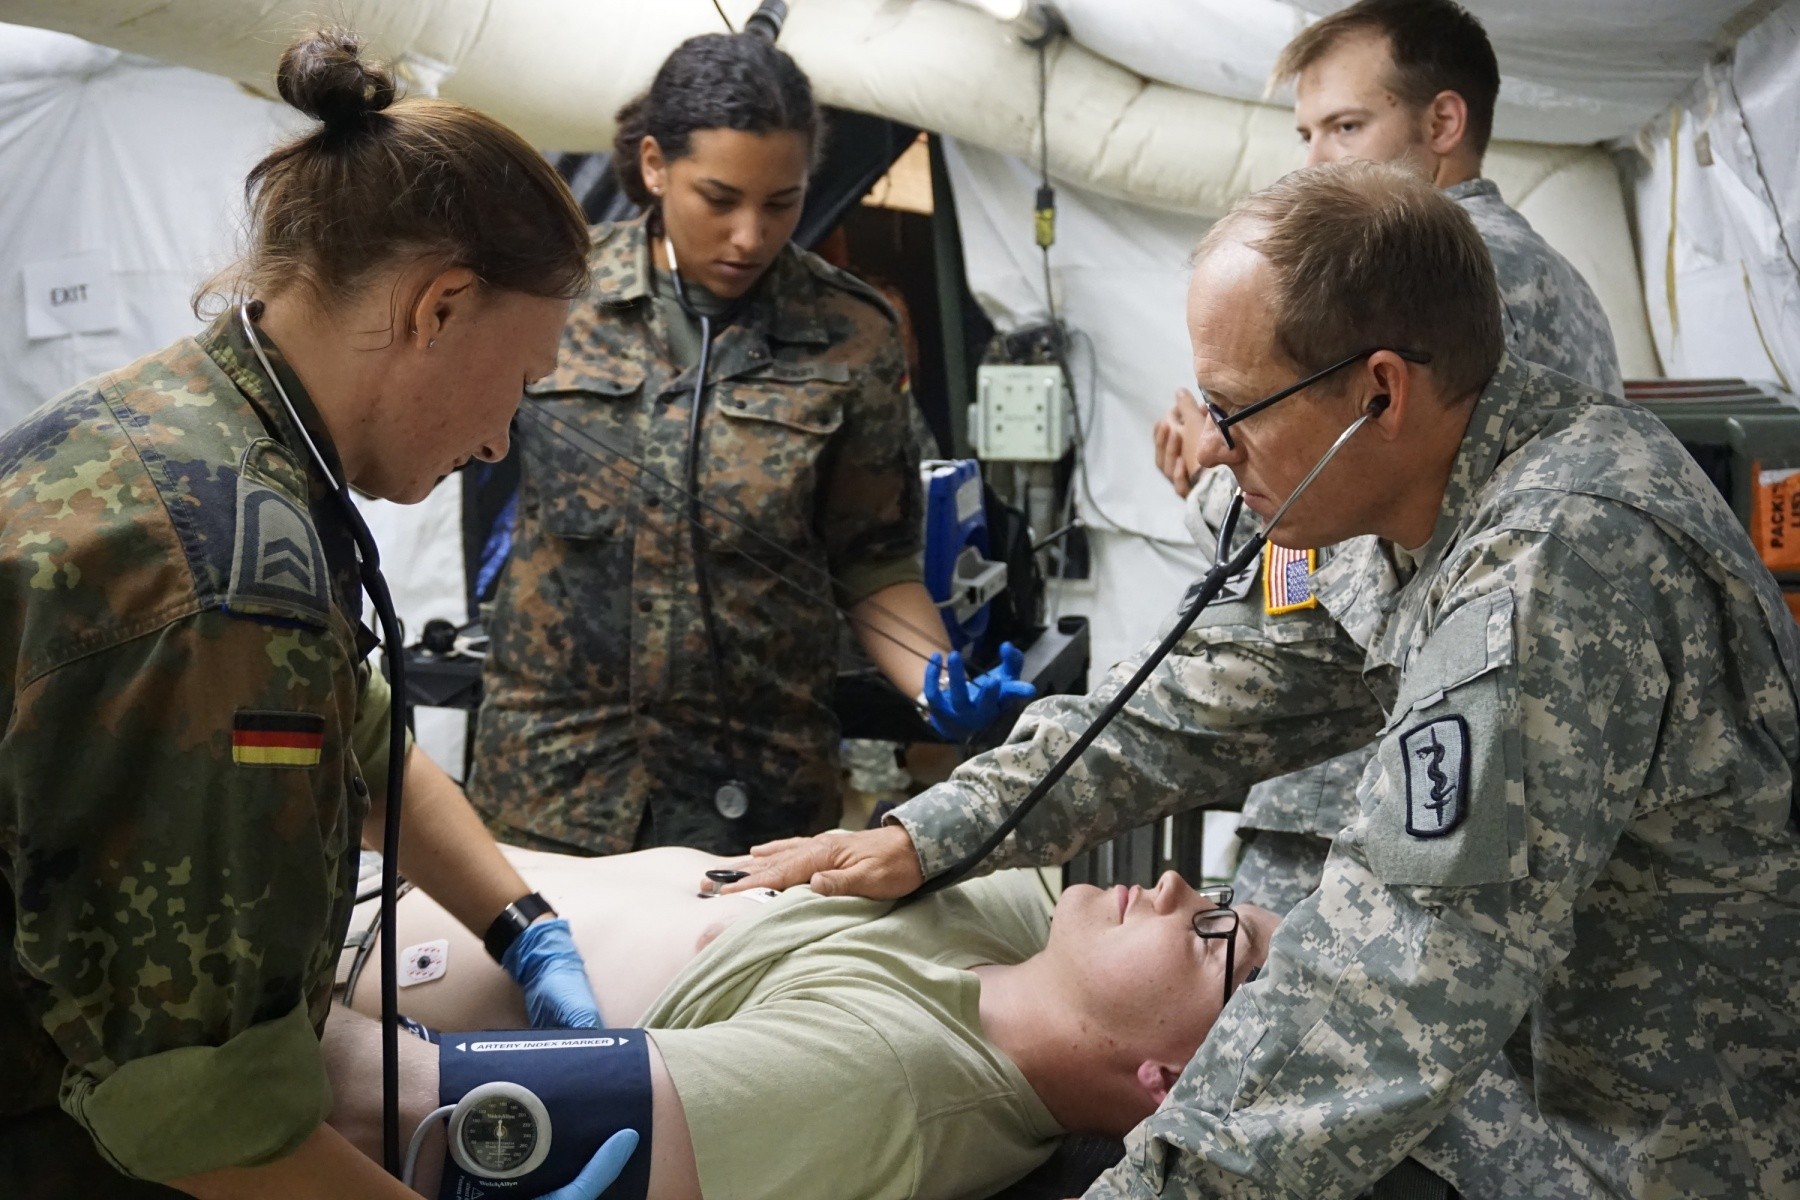 German army nurses integrate with hospital during exercise